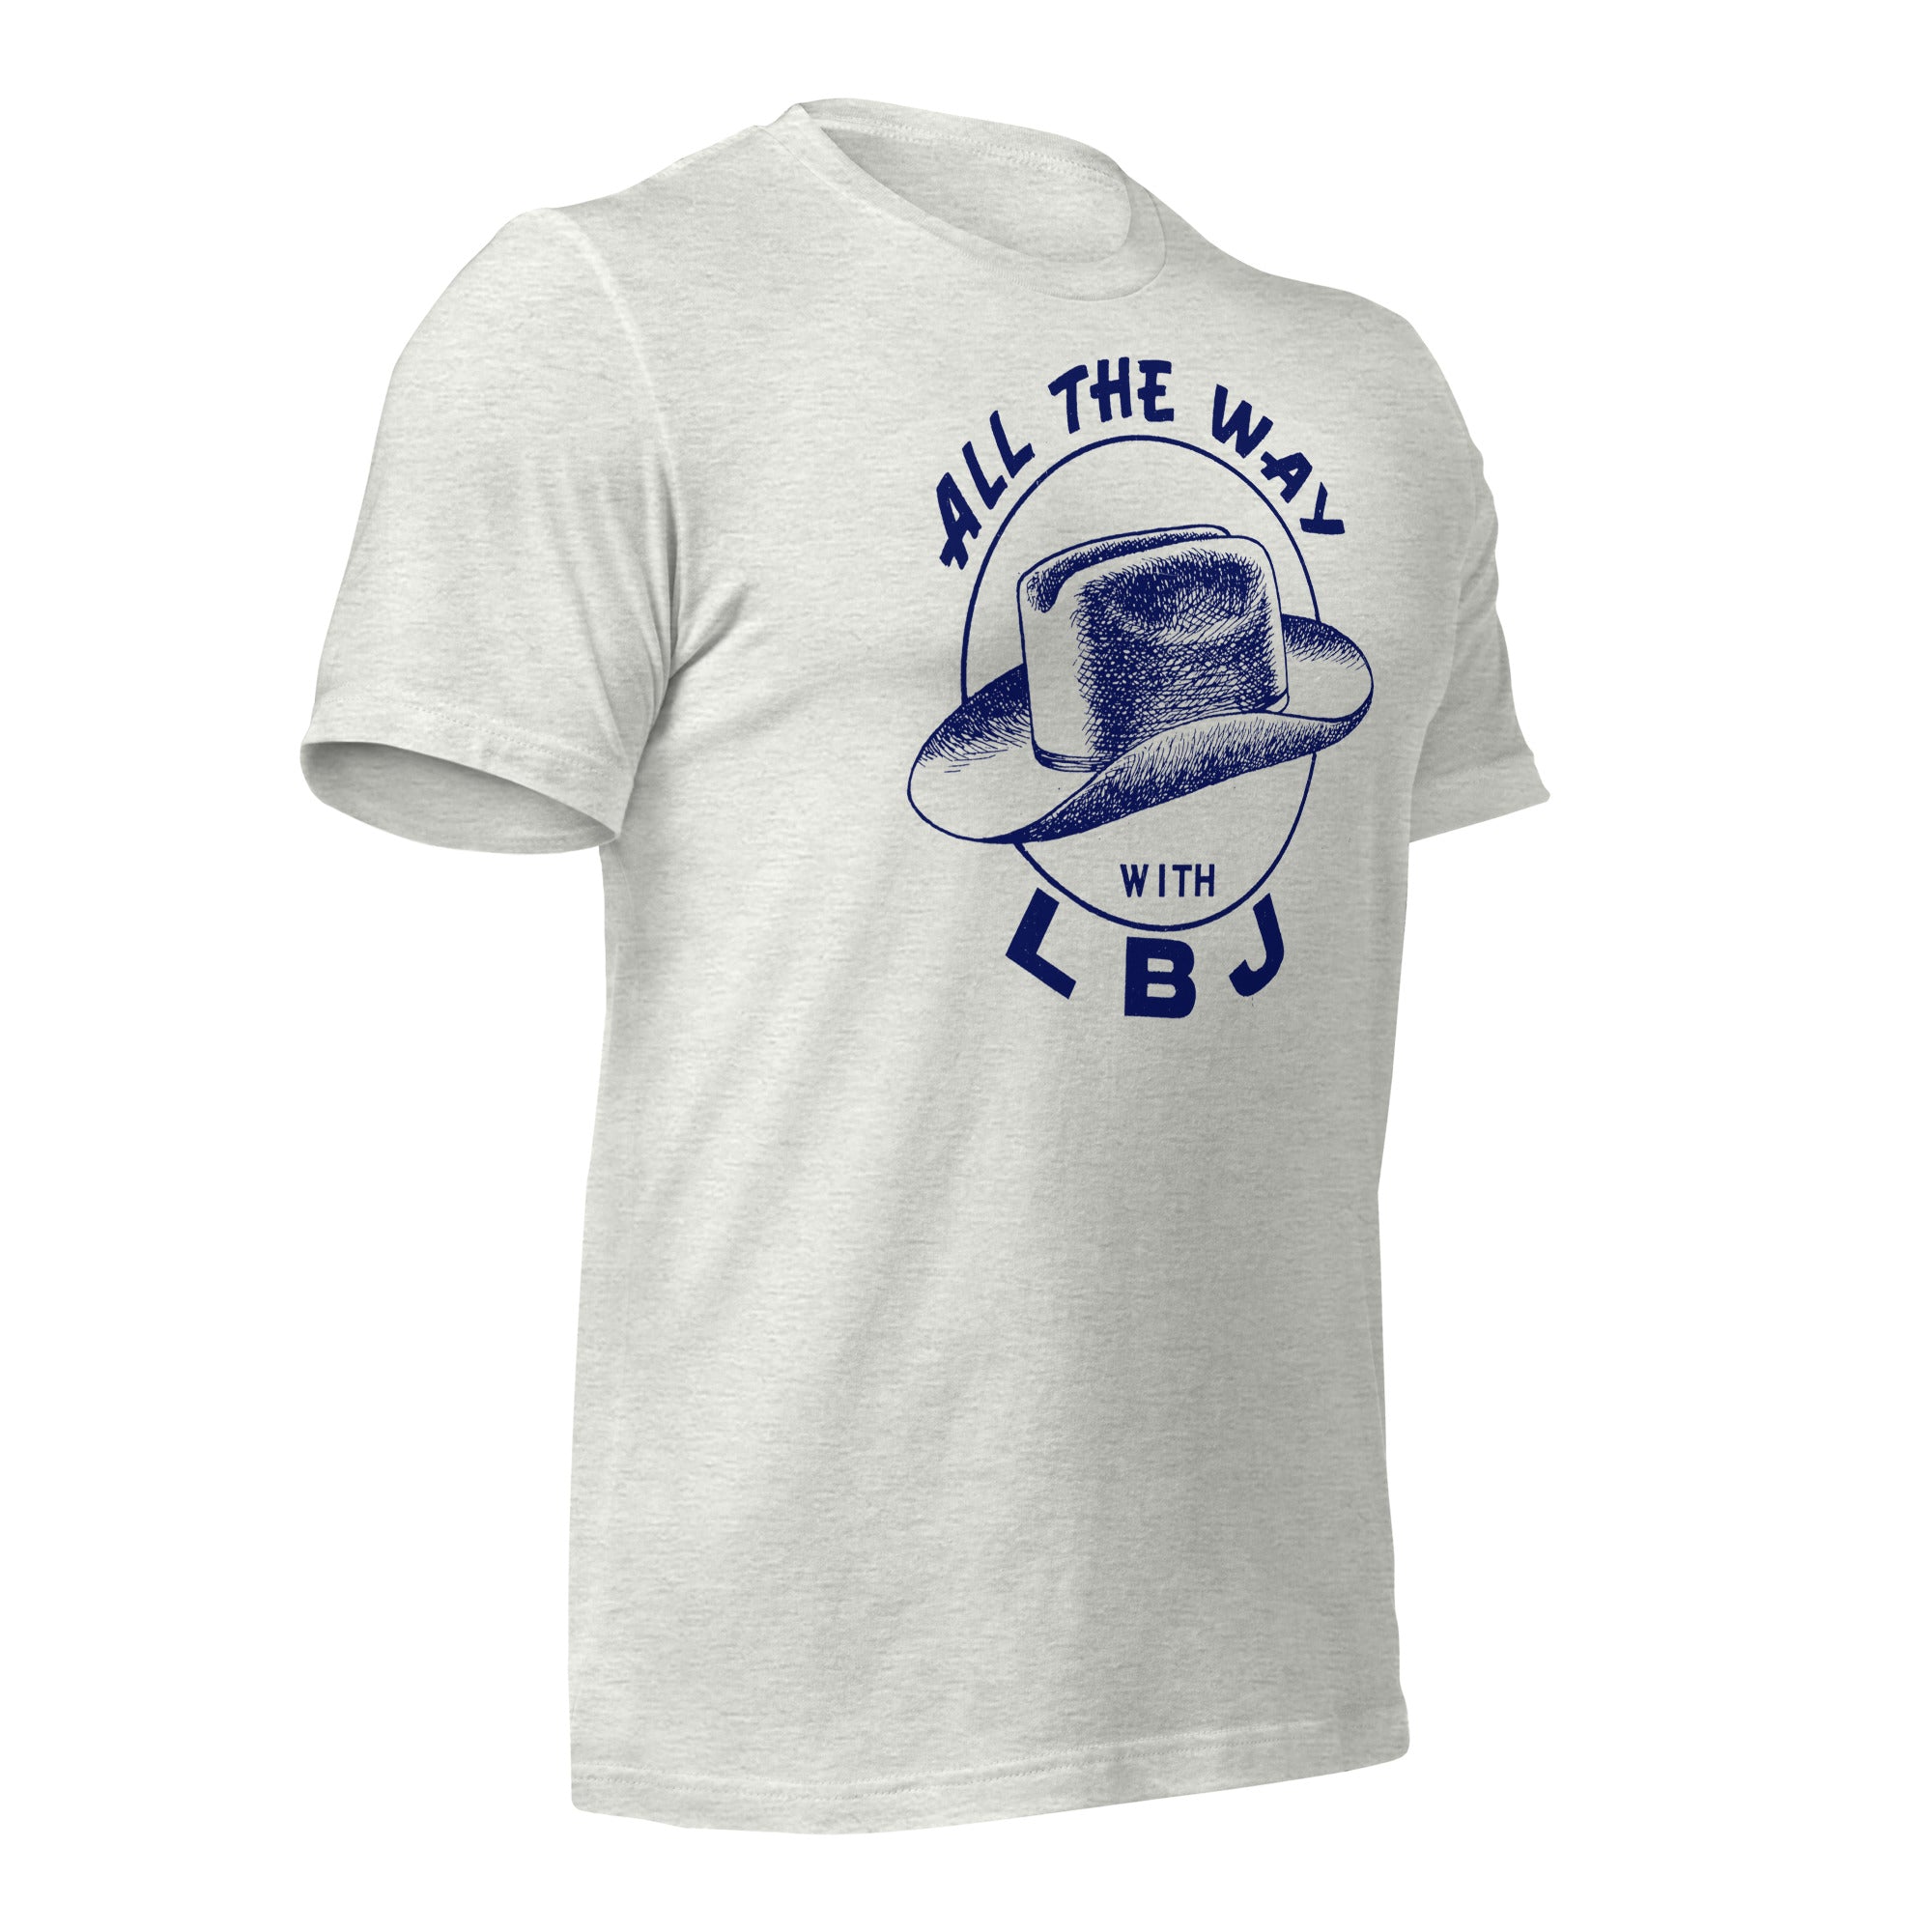 All the Way with LBJ 1964 Reproduction Campaign Short-Sleeve Unisex T-Shirt